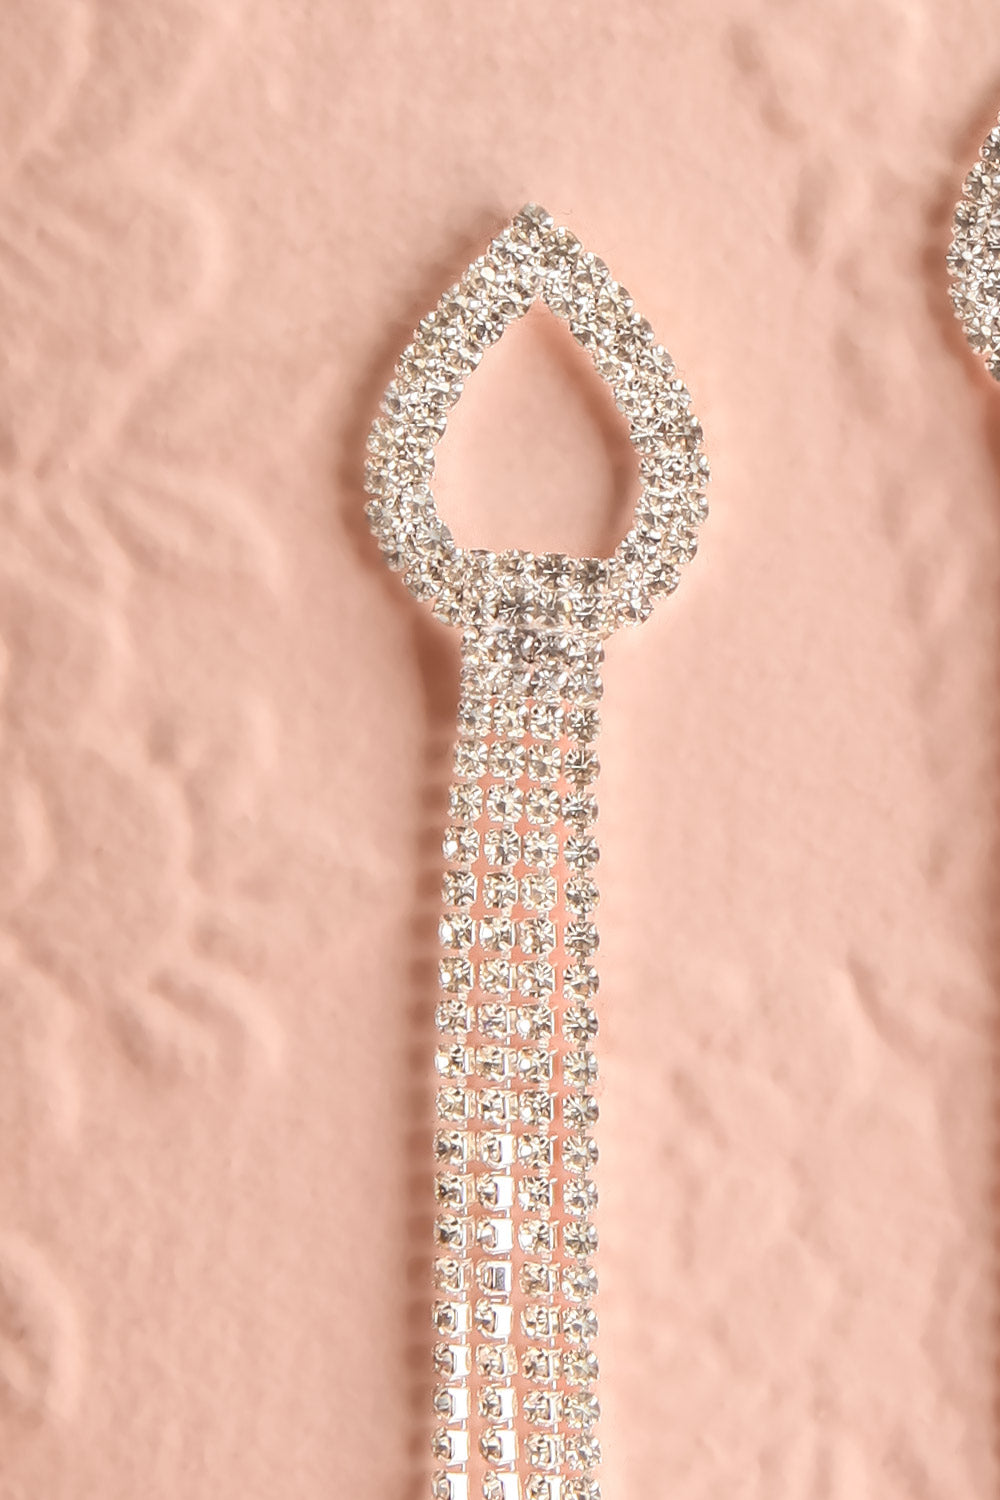 Dita Parlo Silver Crystal Pendant Earrings | Boutique 1861 close-up